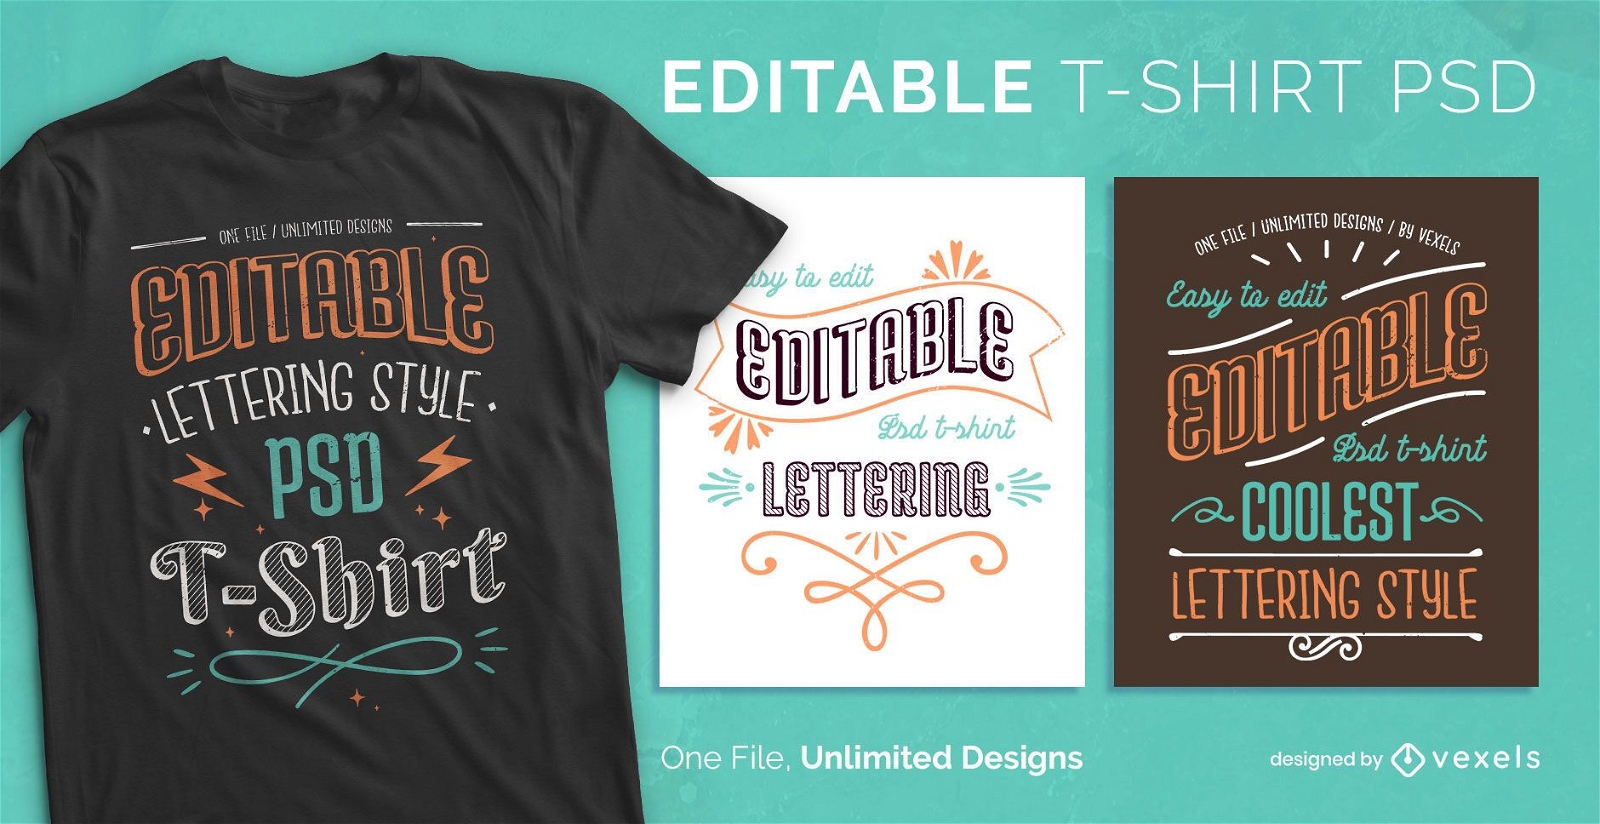 Vintage lettering scalable t-shirt psd